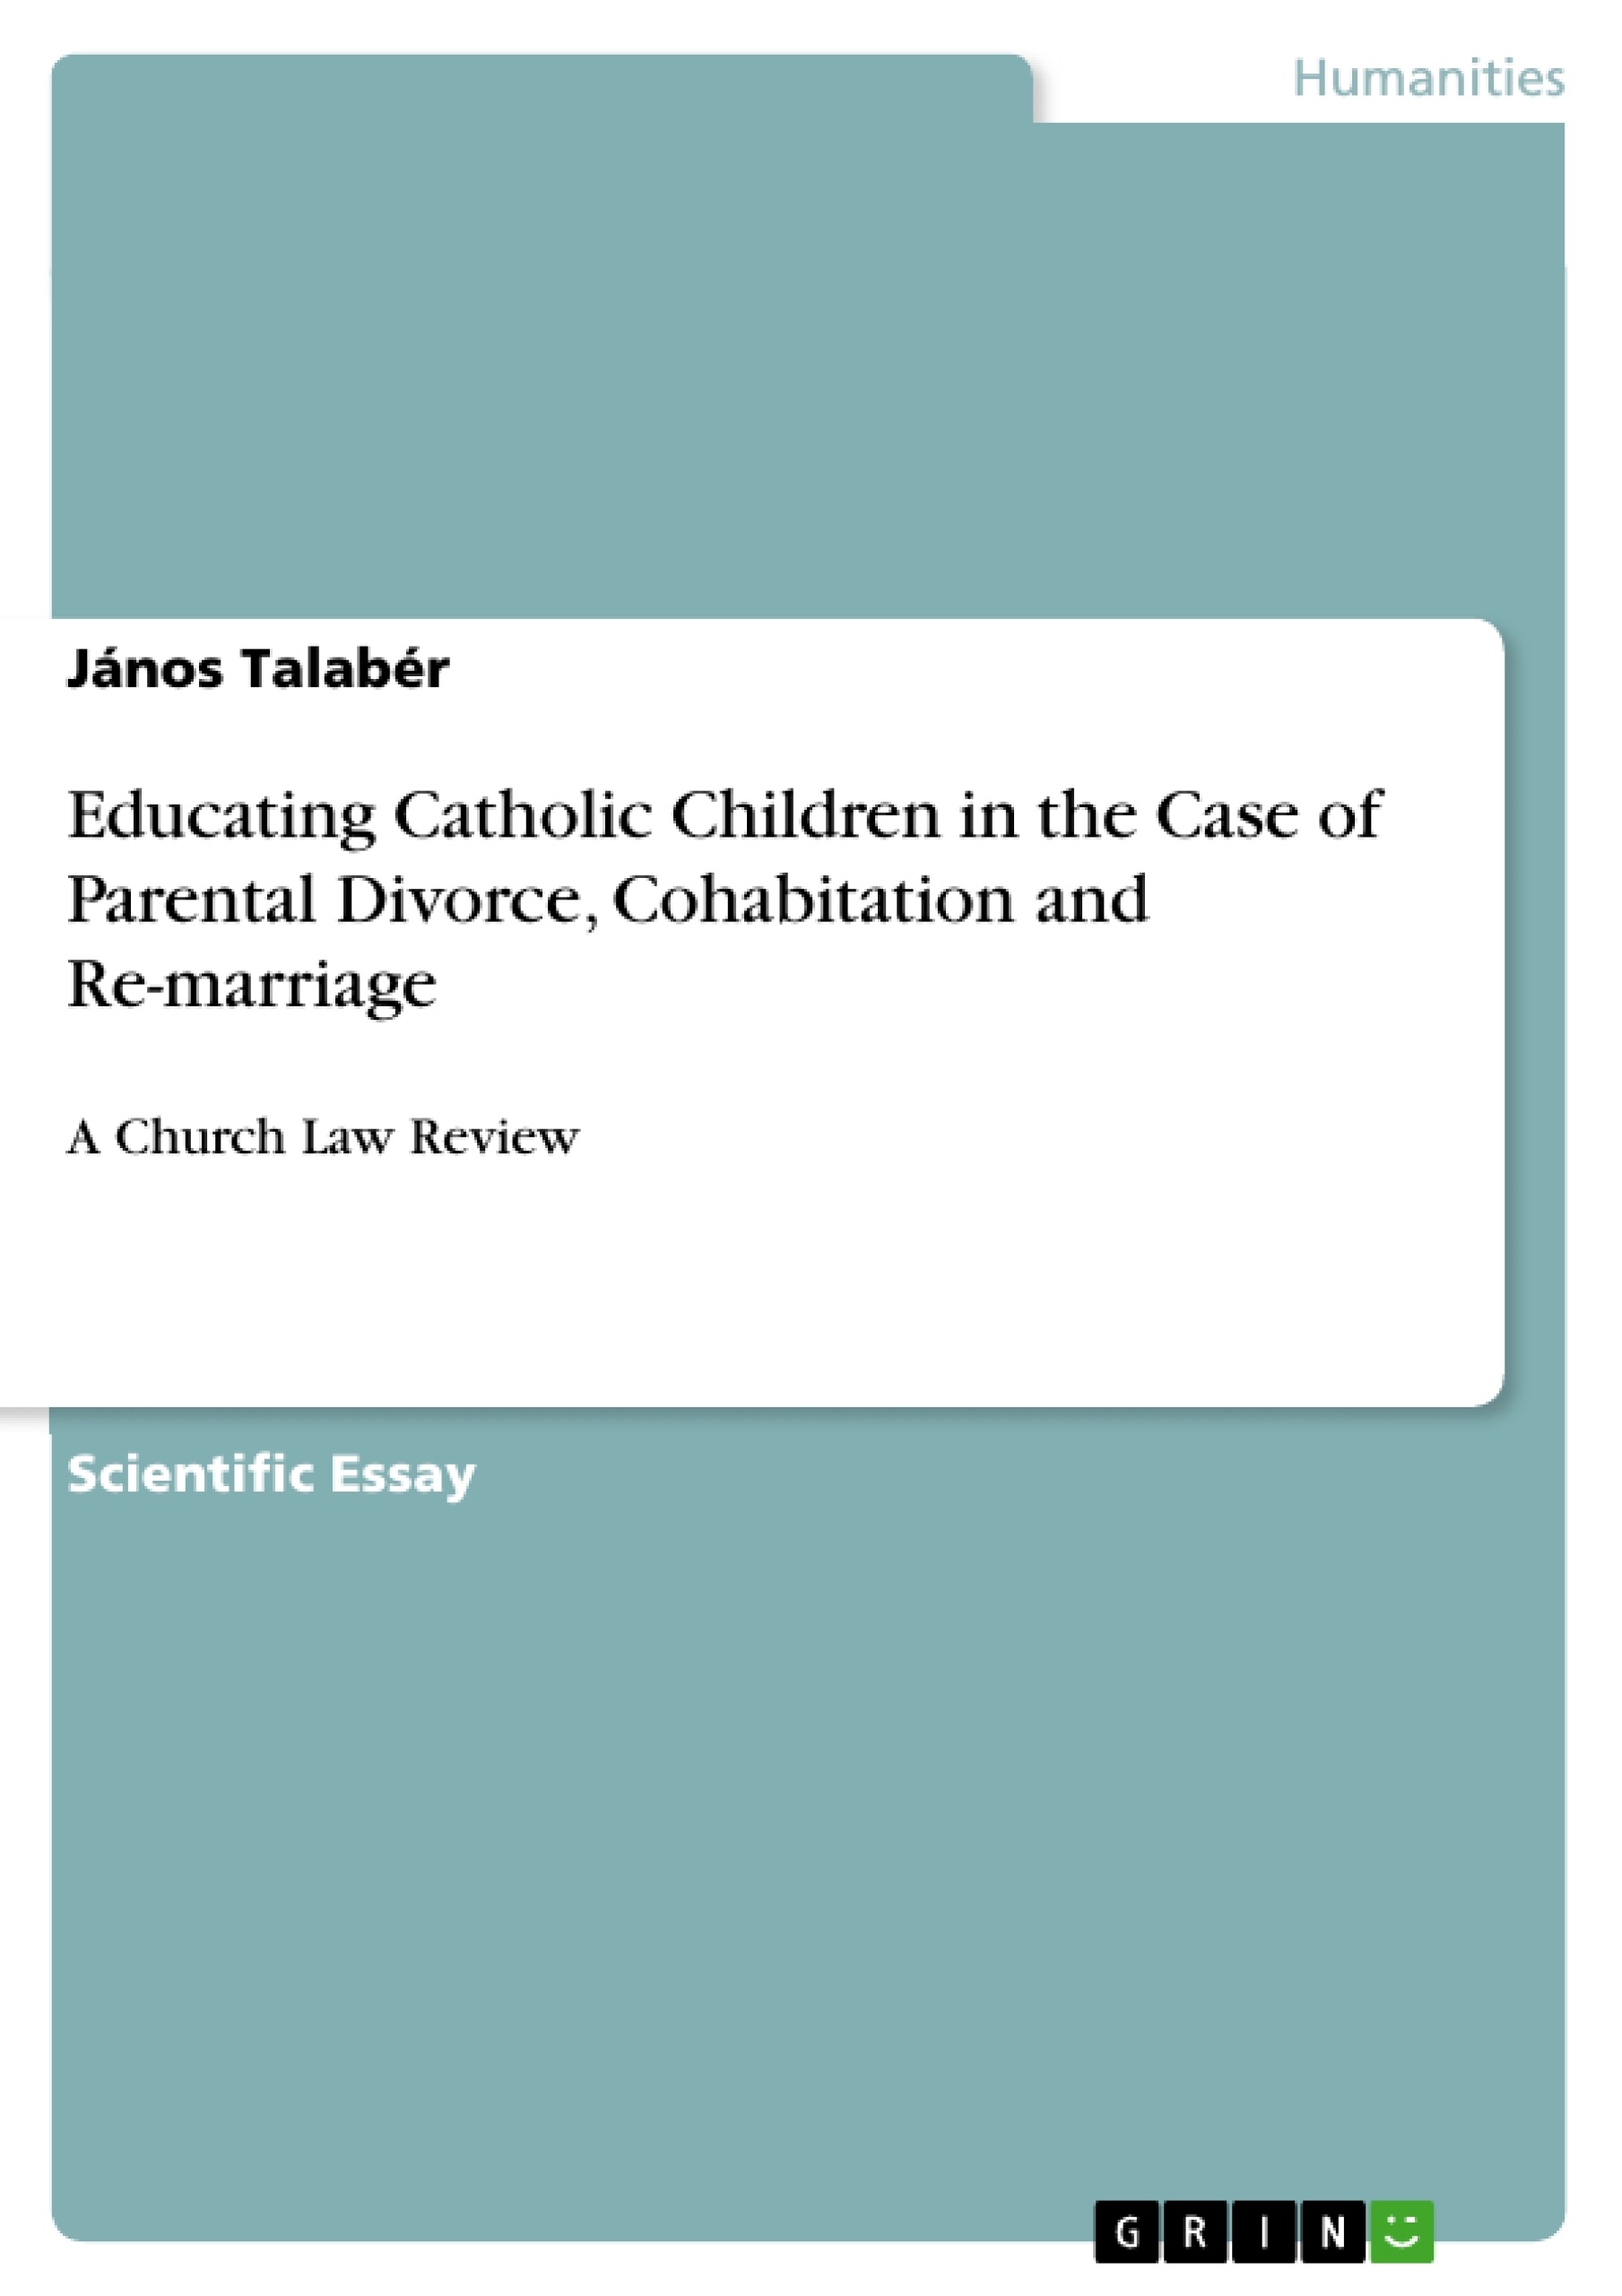 Título: Educating Catholic Children in the Case of Parental Divorce, Cohabitation and Re-marriage